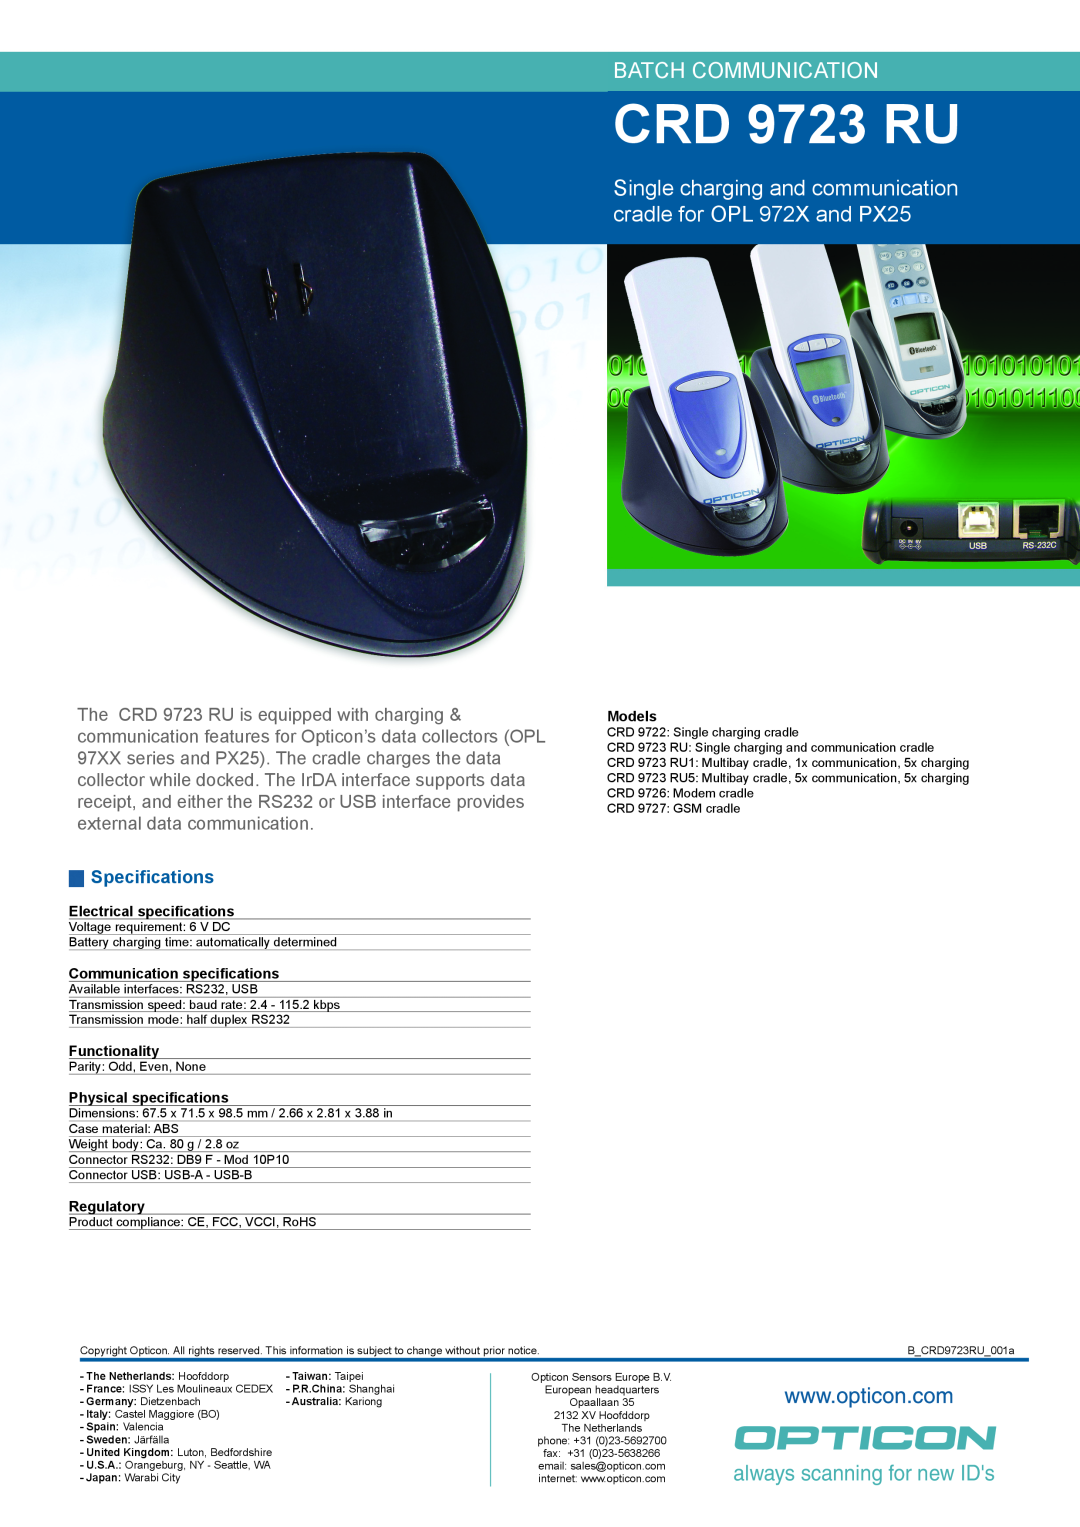 Opticon CRD-9723 dimensions CRD 9723 RU, Batch Communication, always scanning for new IDs, Specifications, Functionality 